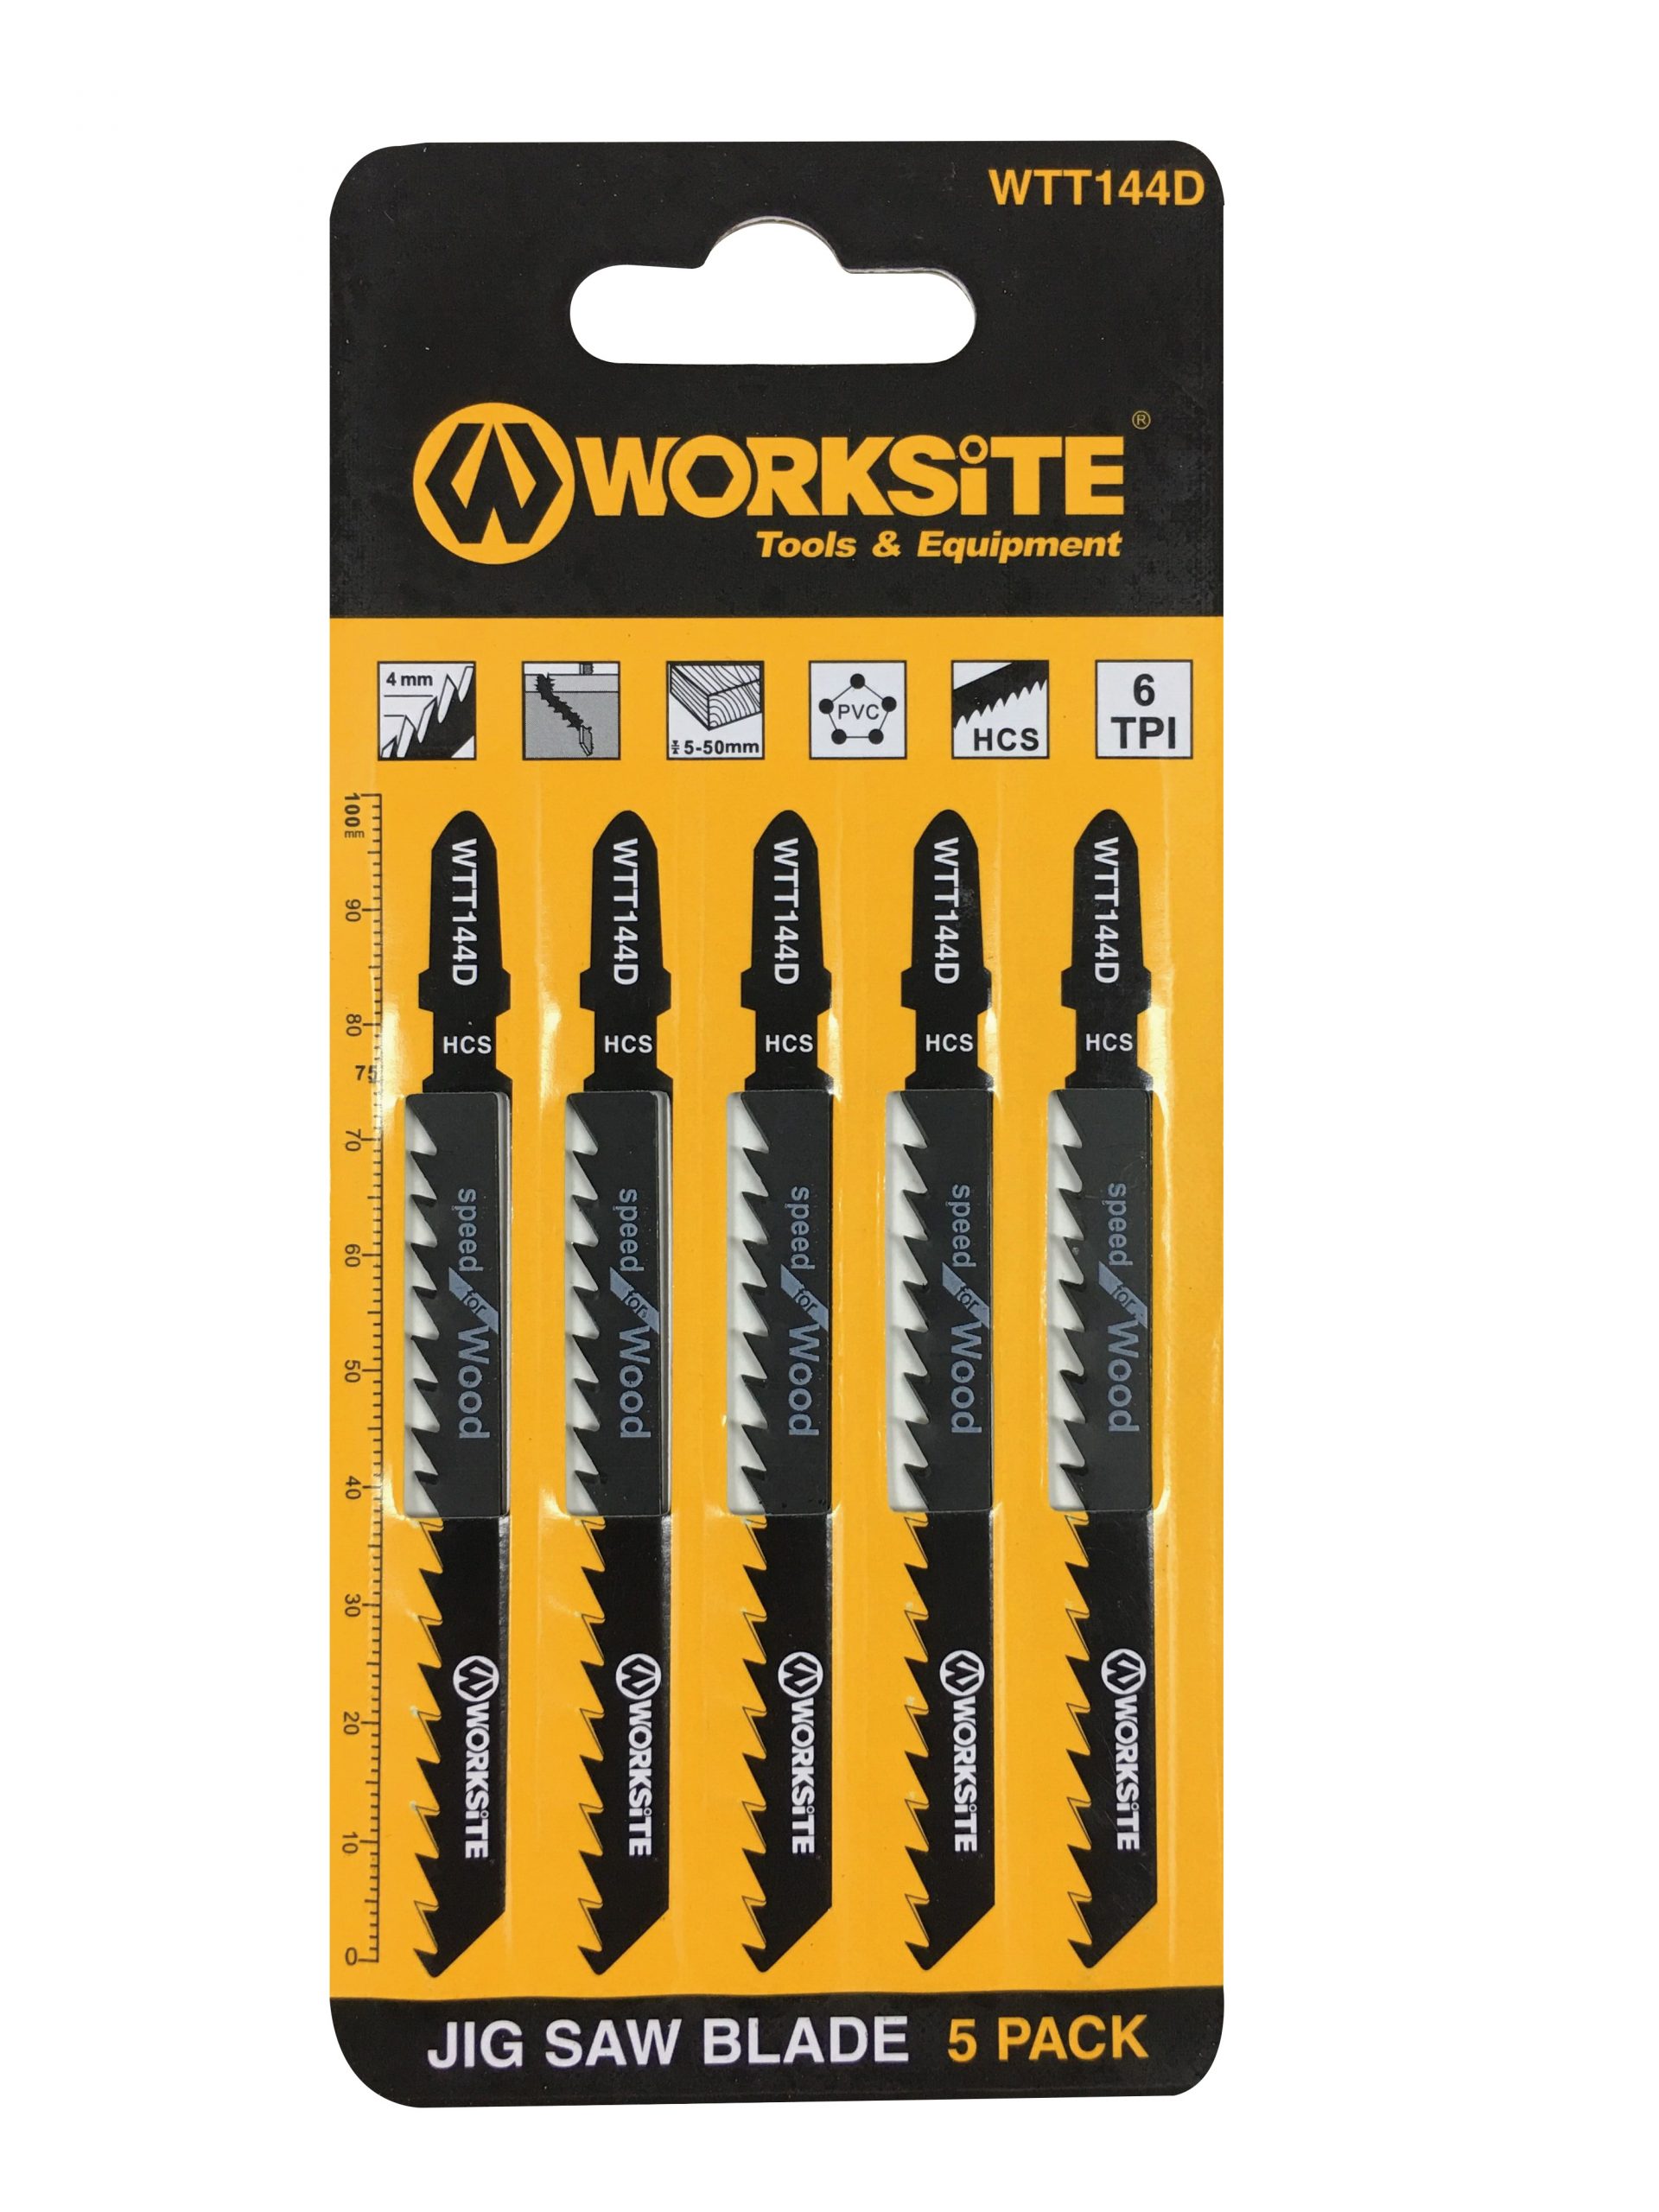 WORKSITE Jigsaw Blade Set 5Pcs, 4 inch X 5/16 inch 6 TPI, HCS T-Shank Jig Saw Blade Fast Cutting Wood, PVC, designed for high-performance cutting and speed in wood applications WTT144D